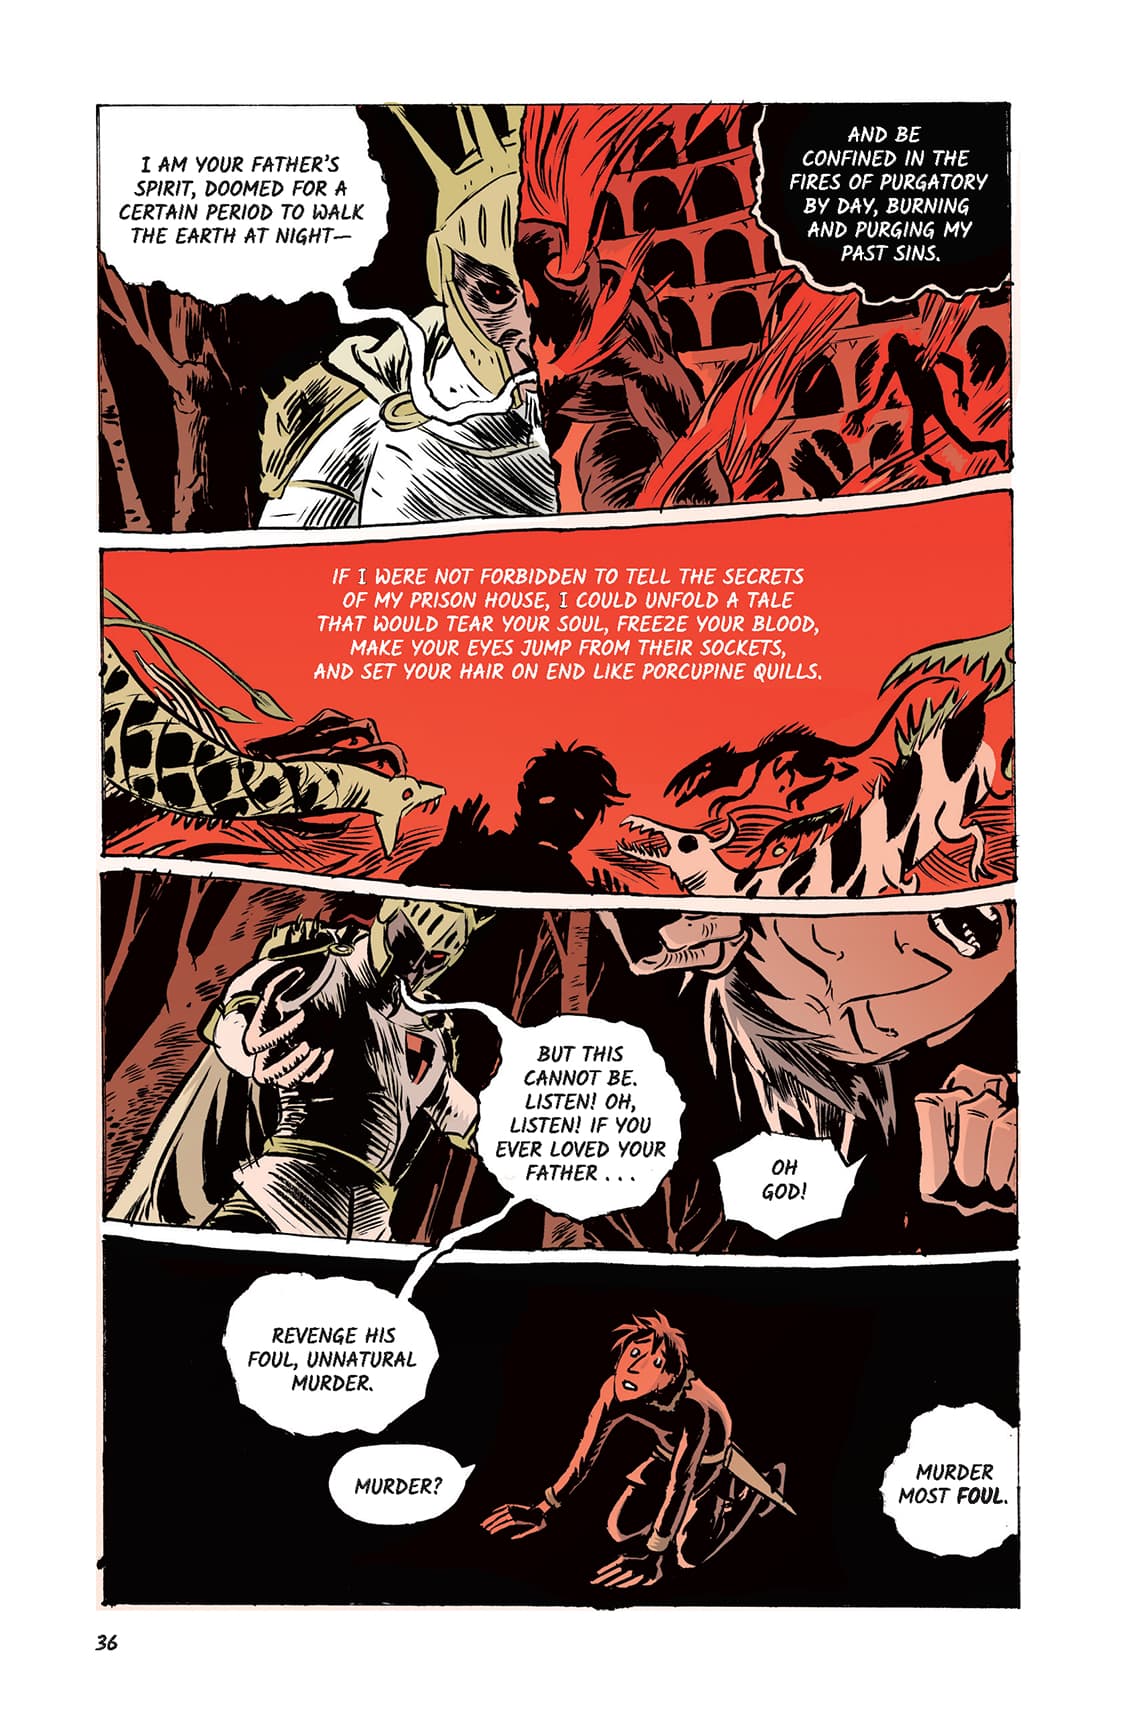 Hamlet Act 1 Scene 5 Page 36 Graphic Novel SparkNotes